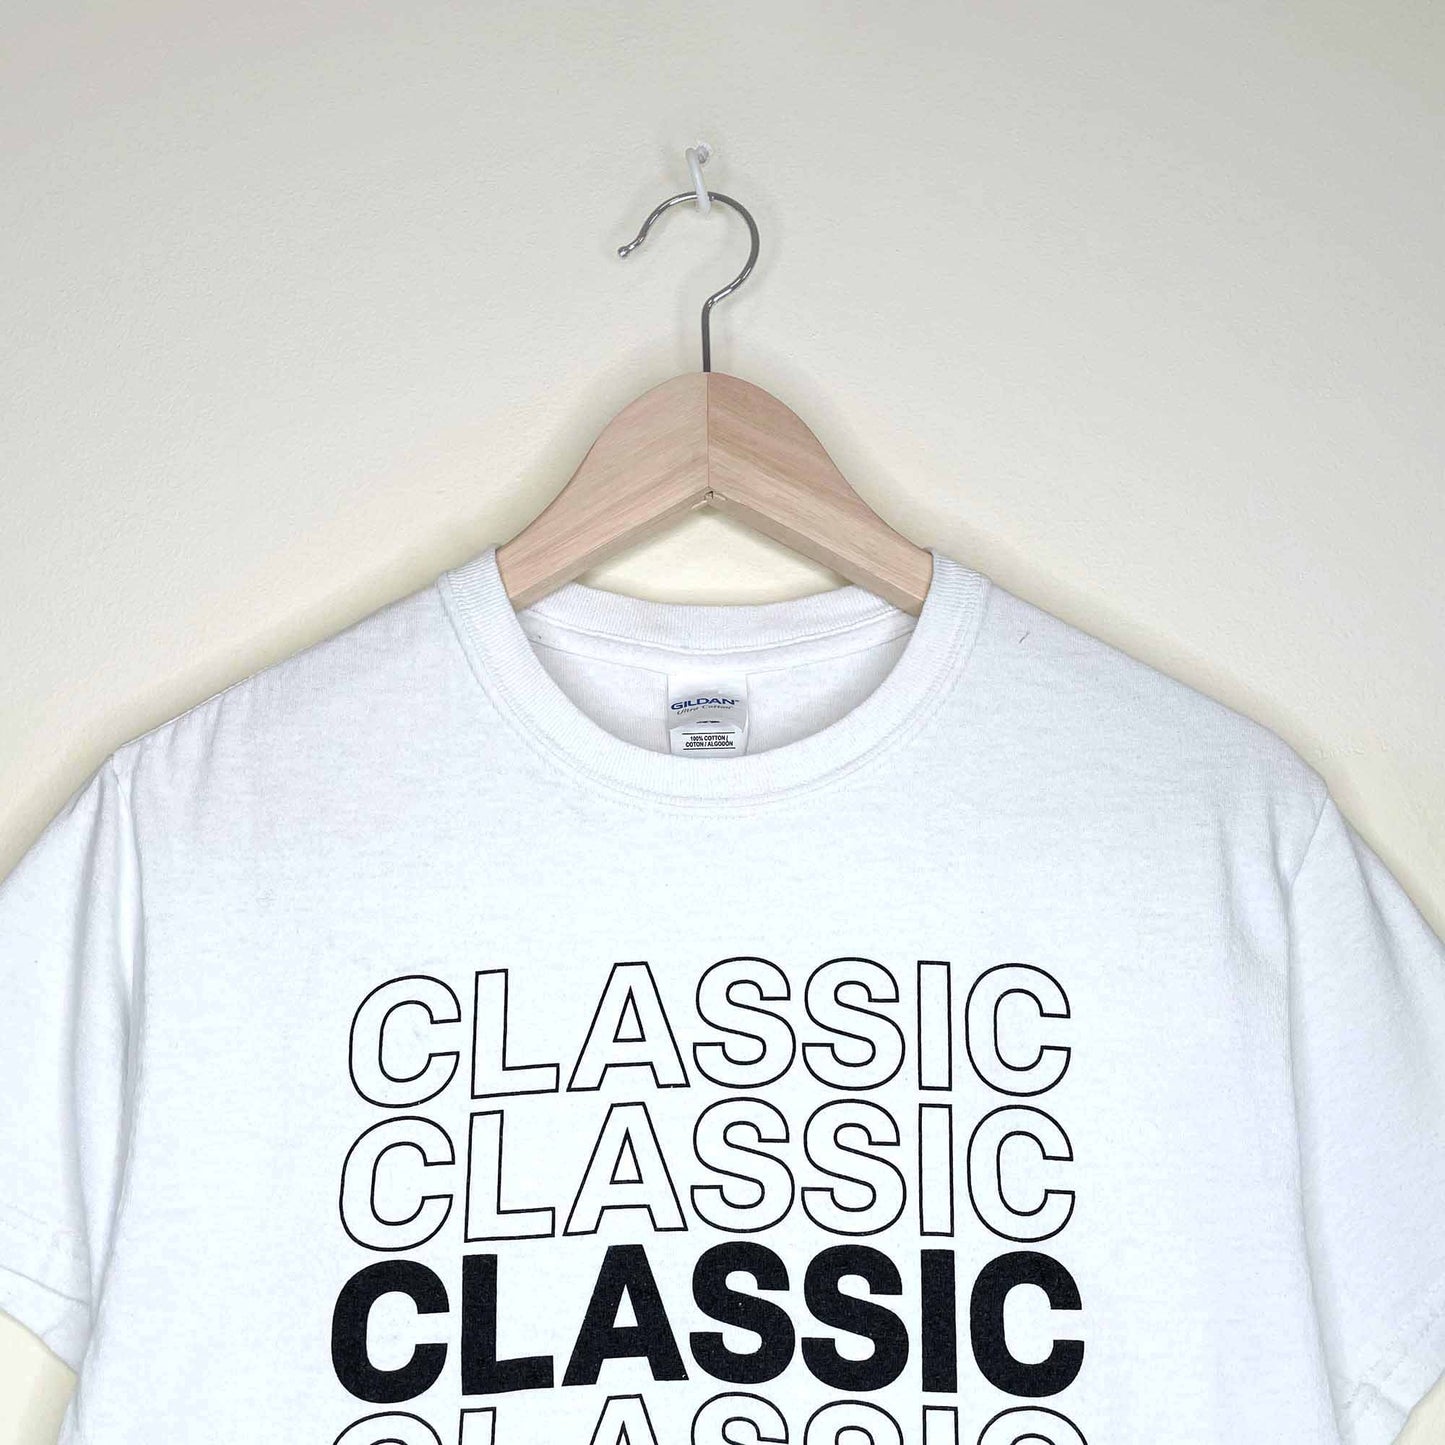 mcdonald's 2018 classic throwback 90's print tee - size small